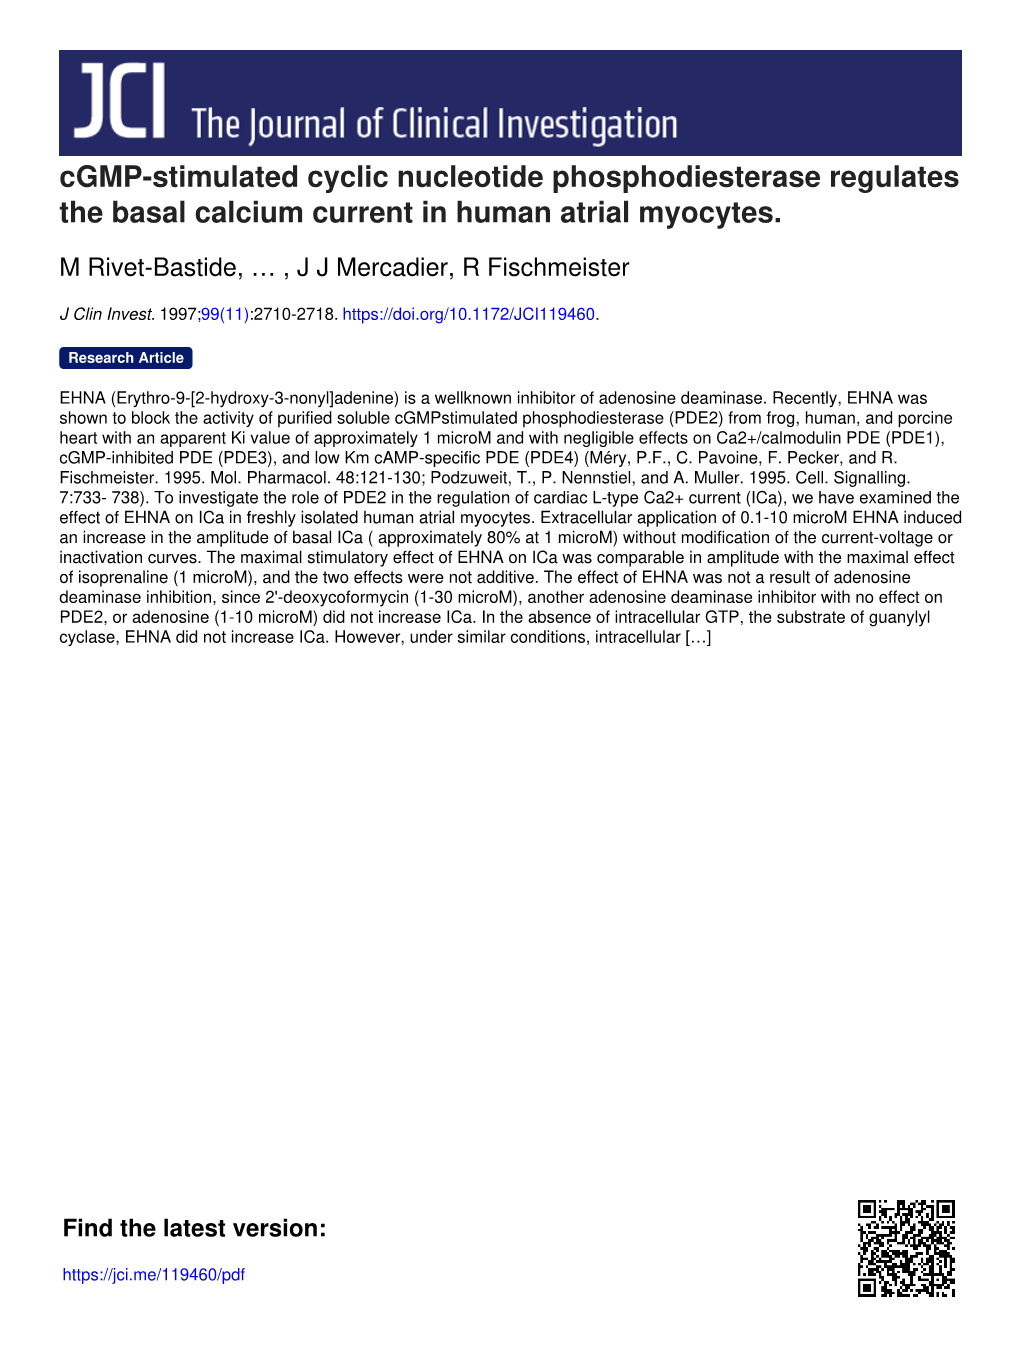 Cgmp-Stimulated Cyclic Nucleotide Phosphodiesterase Regulates the Basal Calcium Current in Human Atrial Myocytes